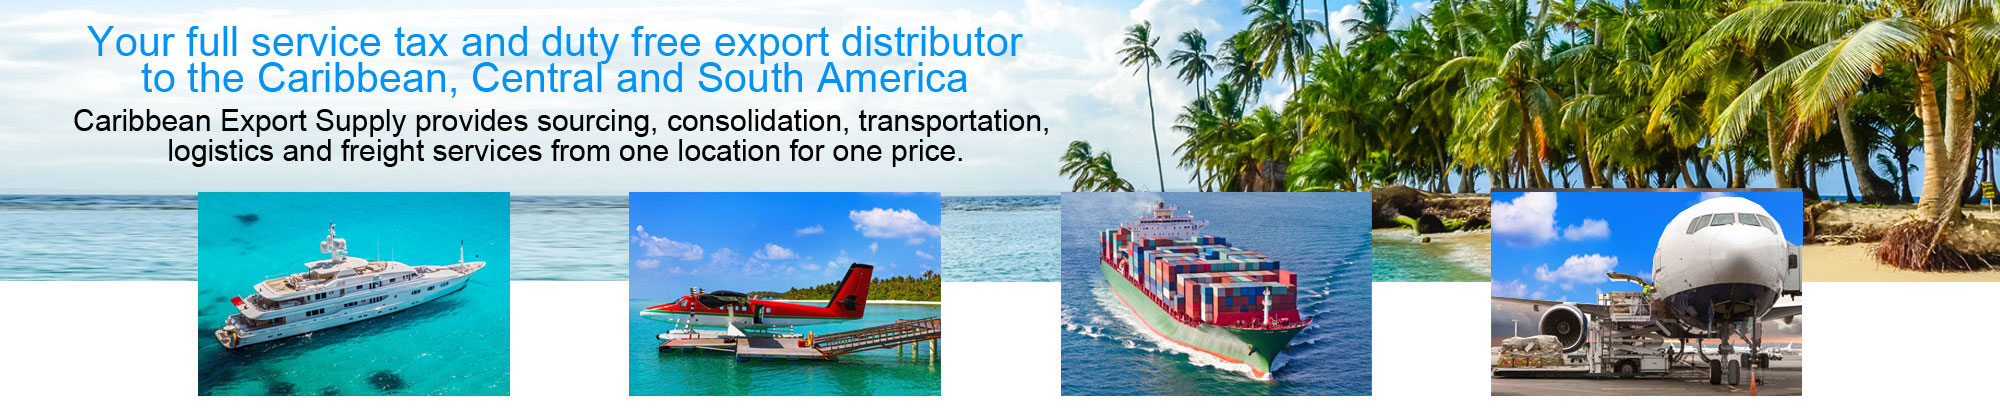 Tax and Duty Free Export Supplier